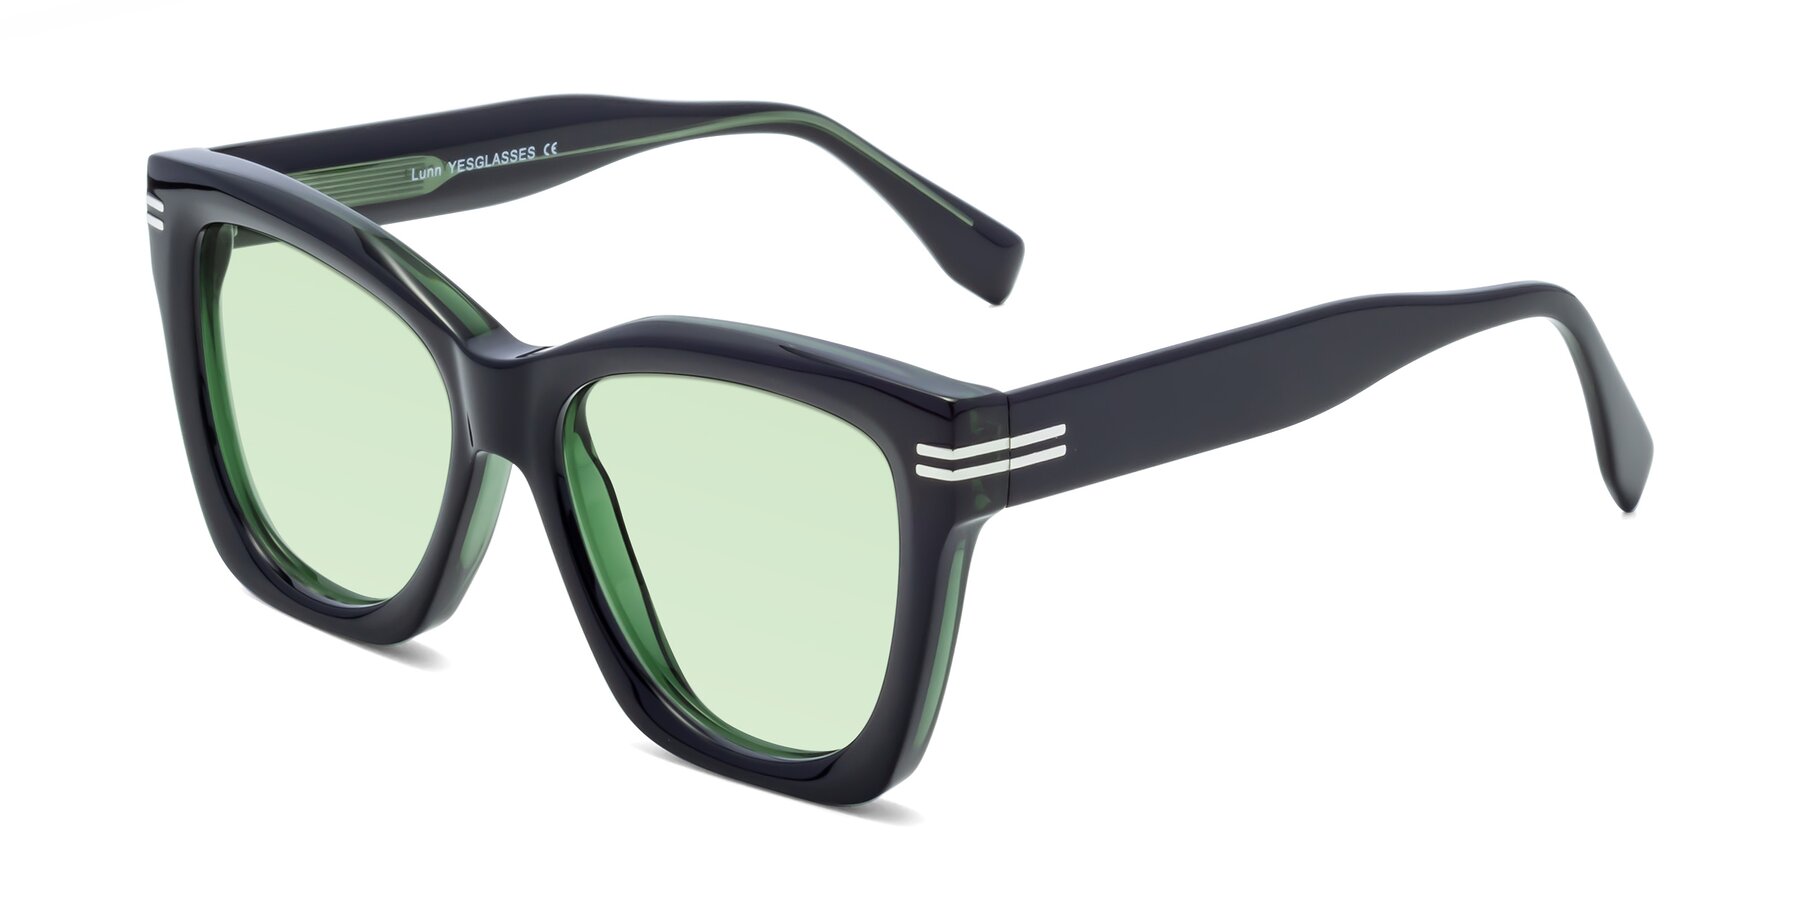 Angle of Lunn in Black-Green with Light Green Tinted Lenses